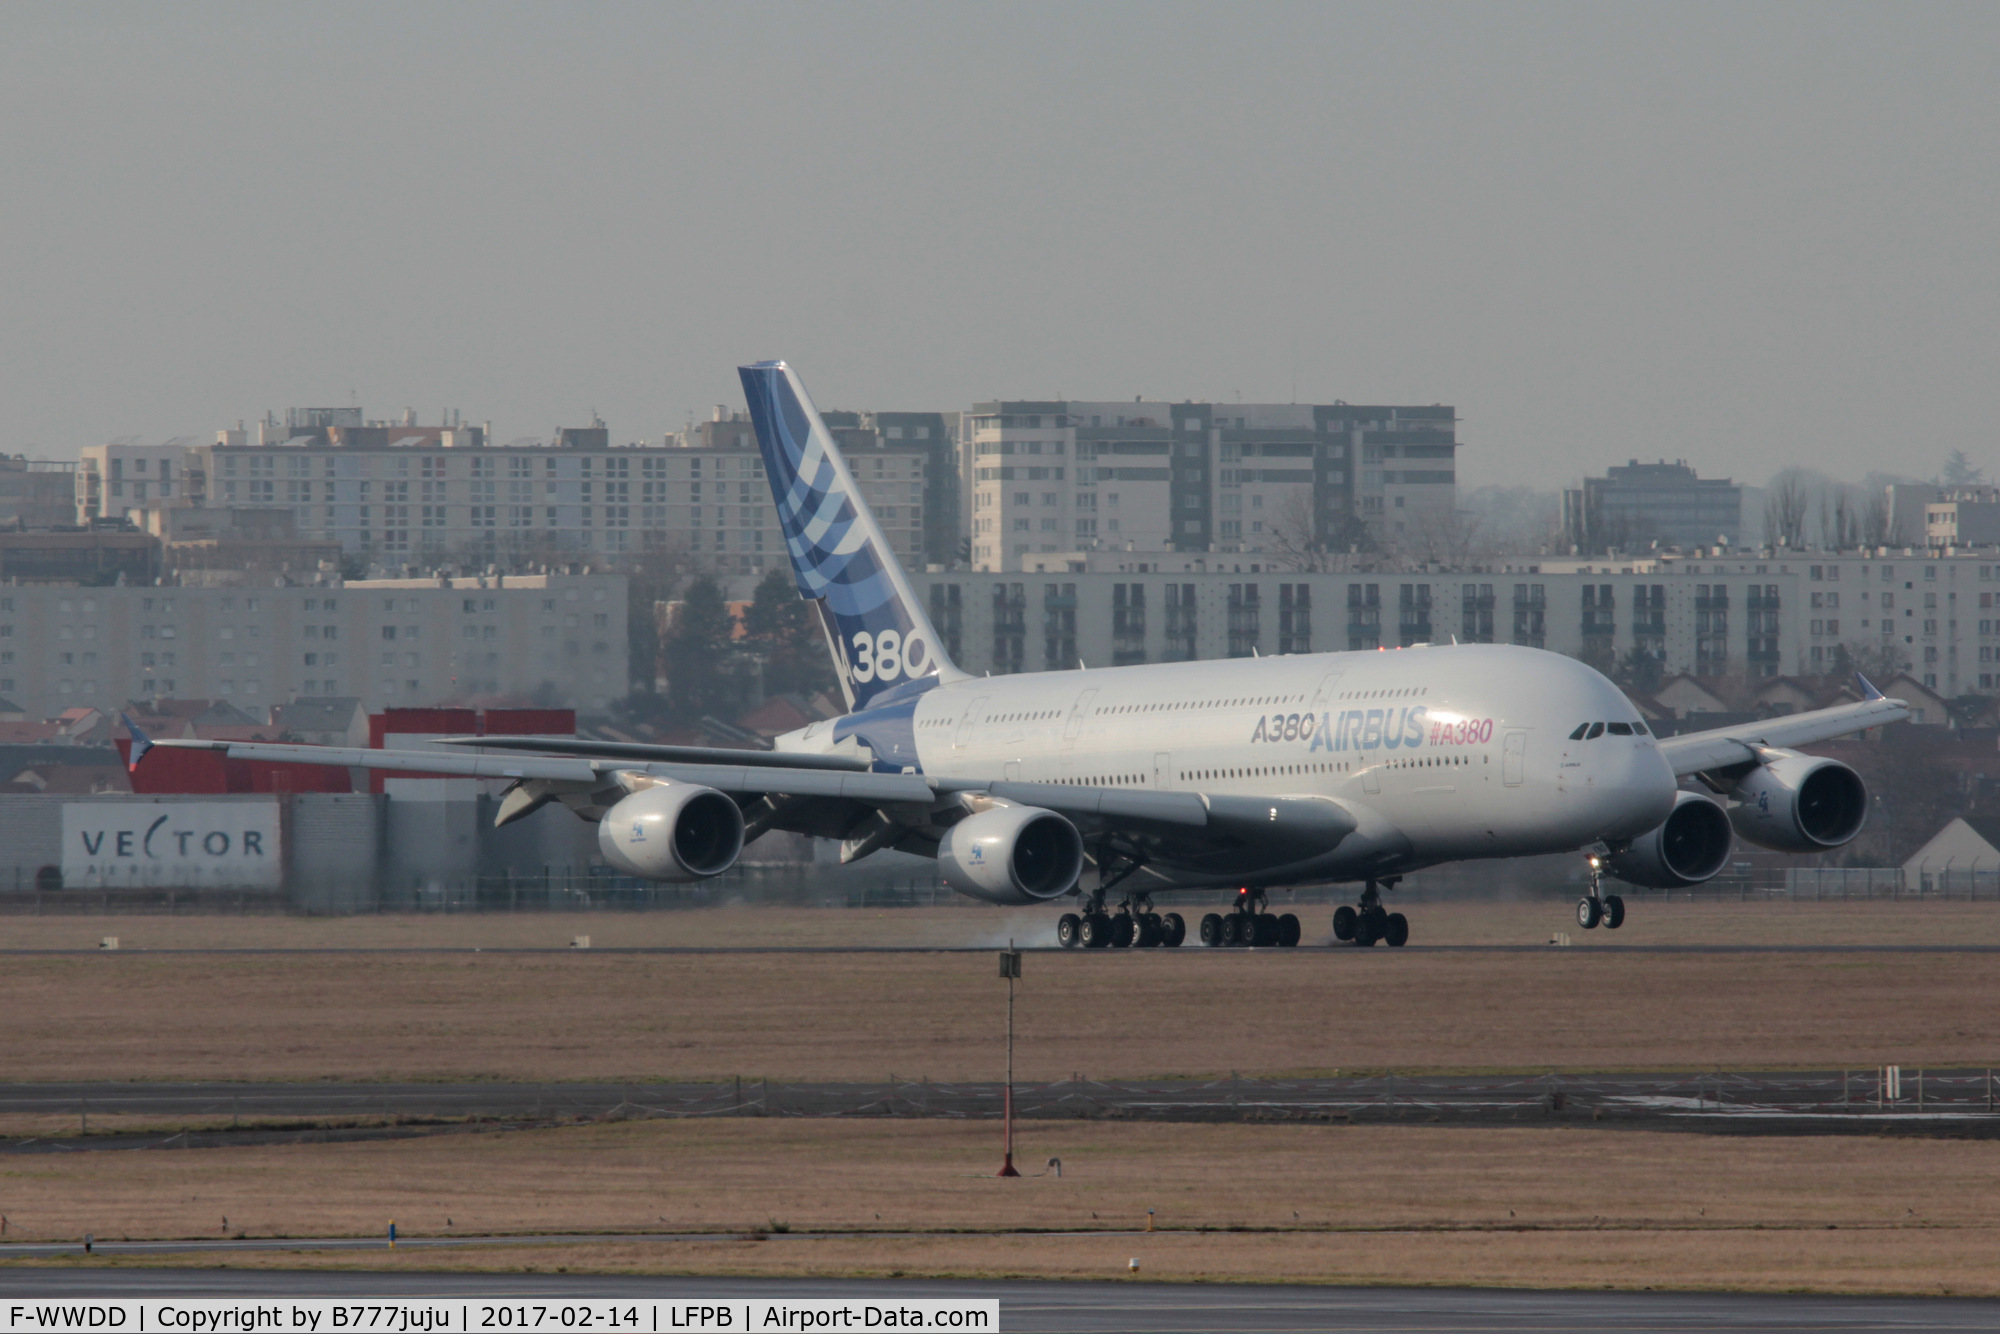 F-WWDD, 2005 Airbus A380-861 C/N 004, last landing, put in display at Air And Space Museeum at Le Bourget Airport